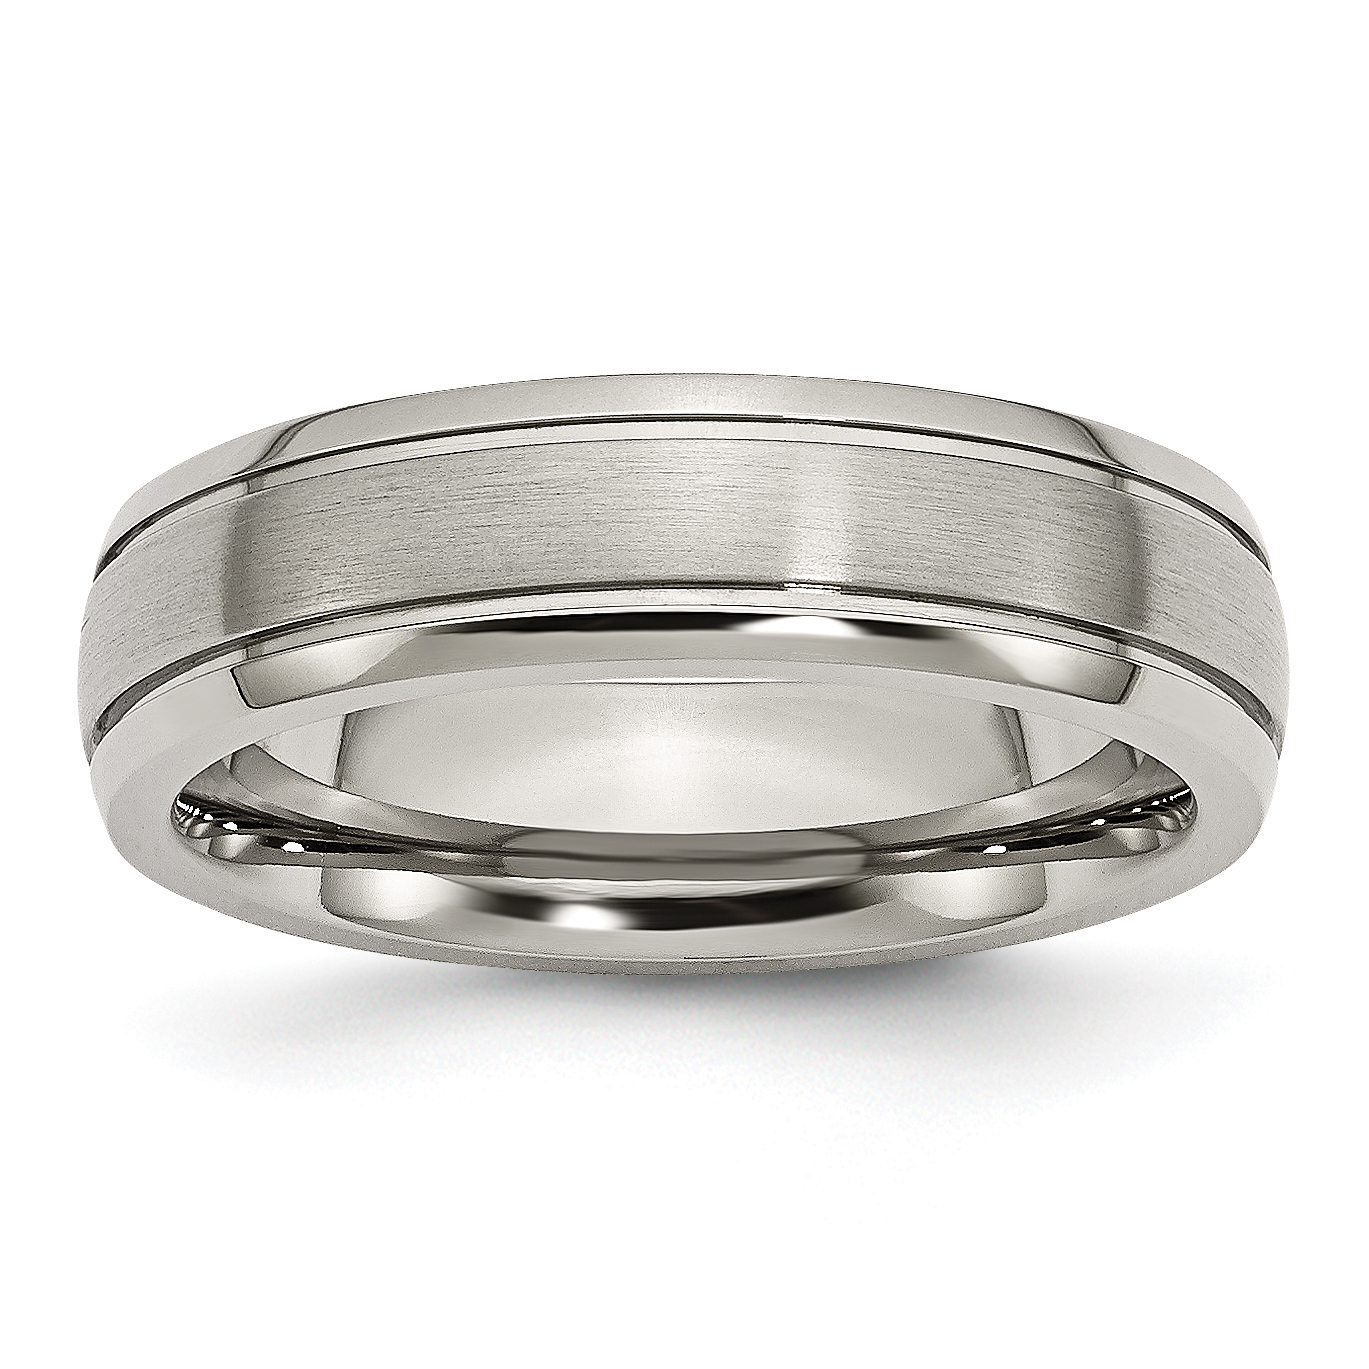 Details about   Titanium Grooved 6 MM Polished and Satin Wedding Band